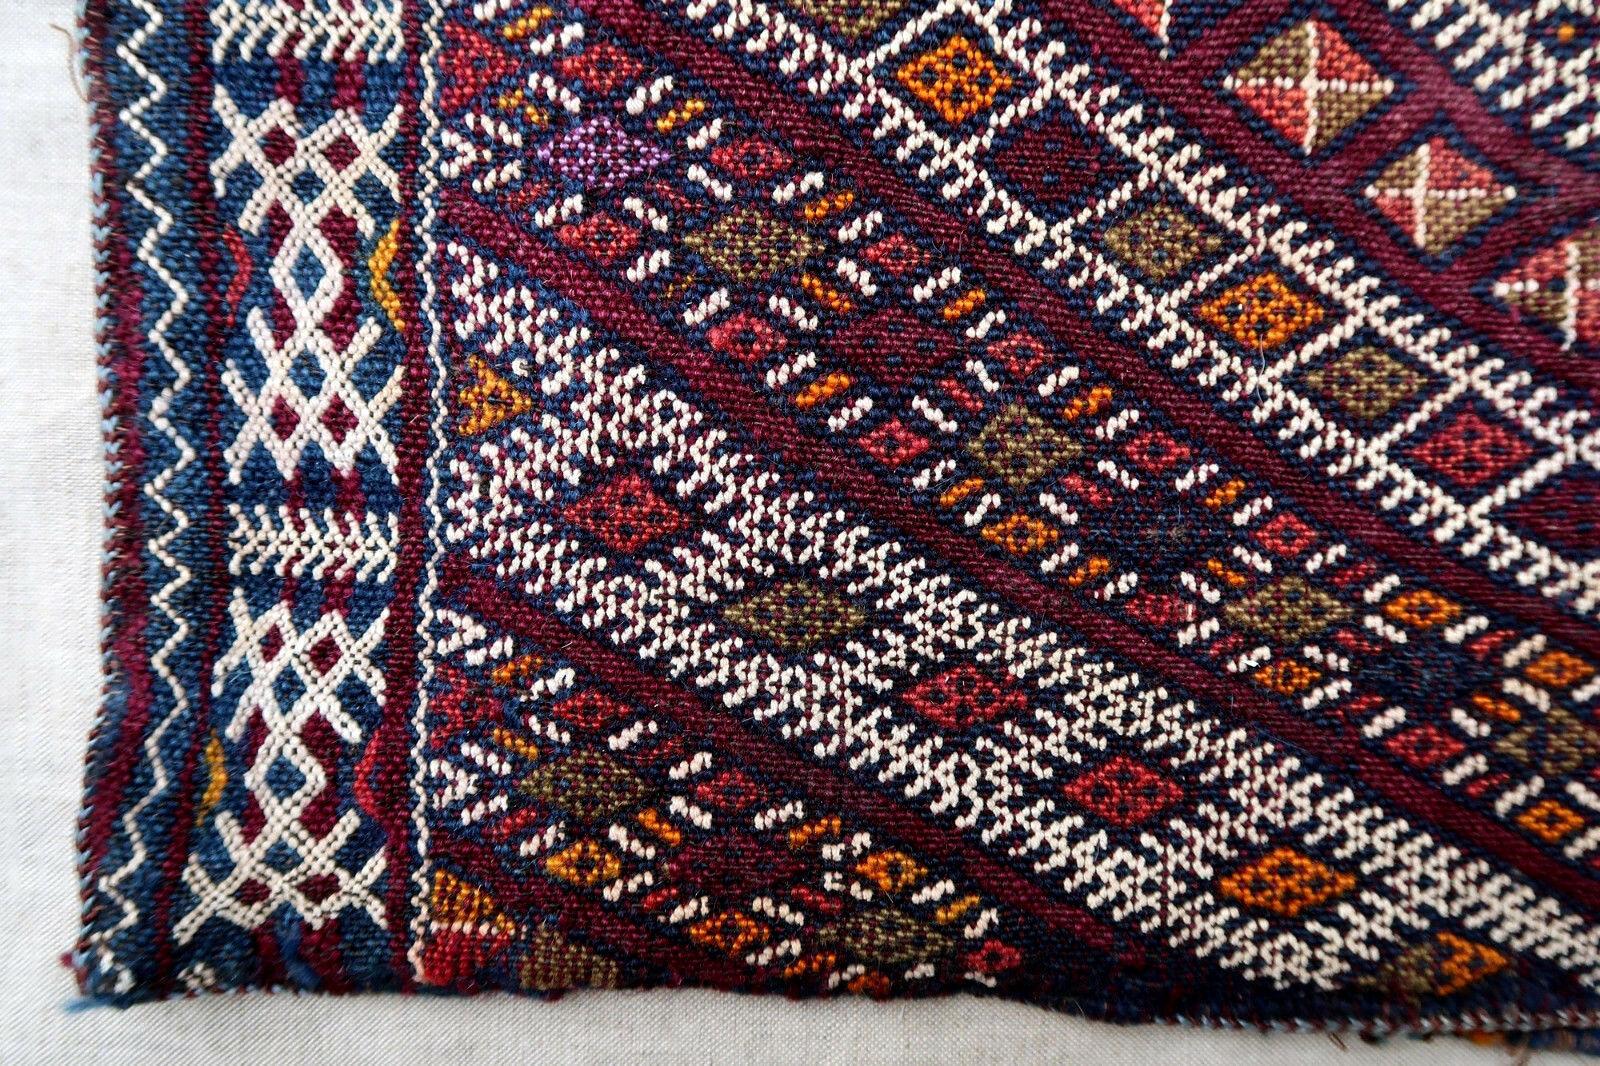 Handmade Vintage Moroccan Berber Kilim Cushion, 1950s, 1P45 In Good Condition For Sale In Bordeaux, FR